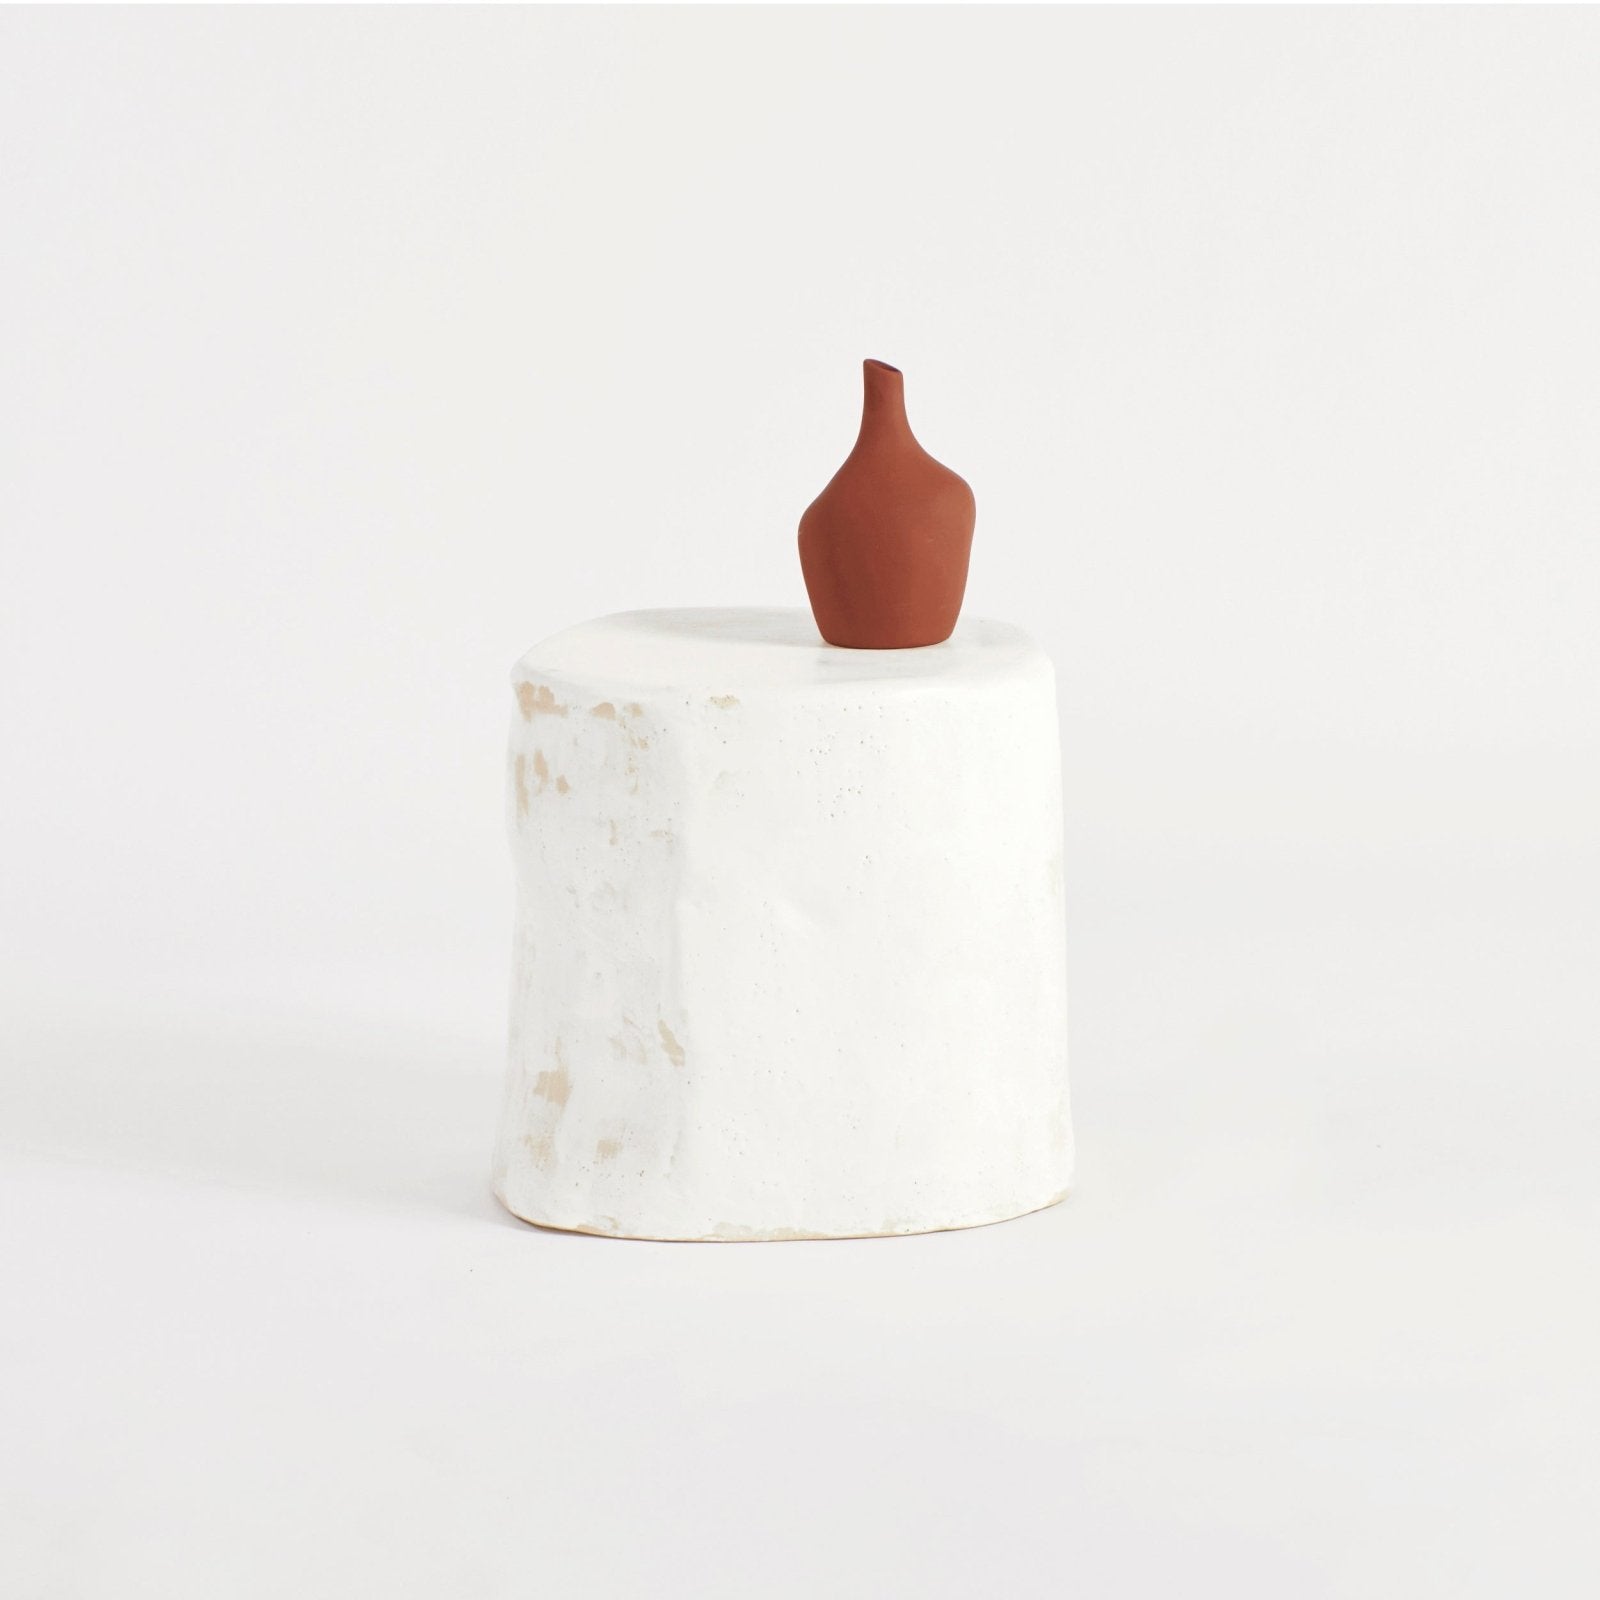 Ceramic White - Ceramic side table Tables by Project 213A